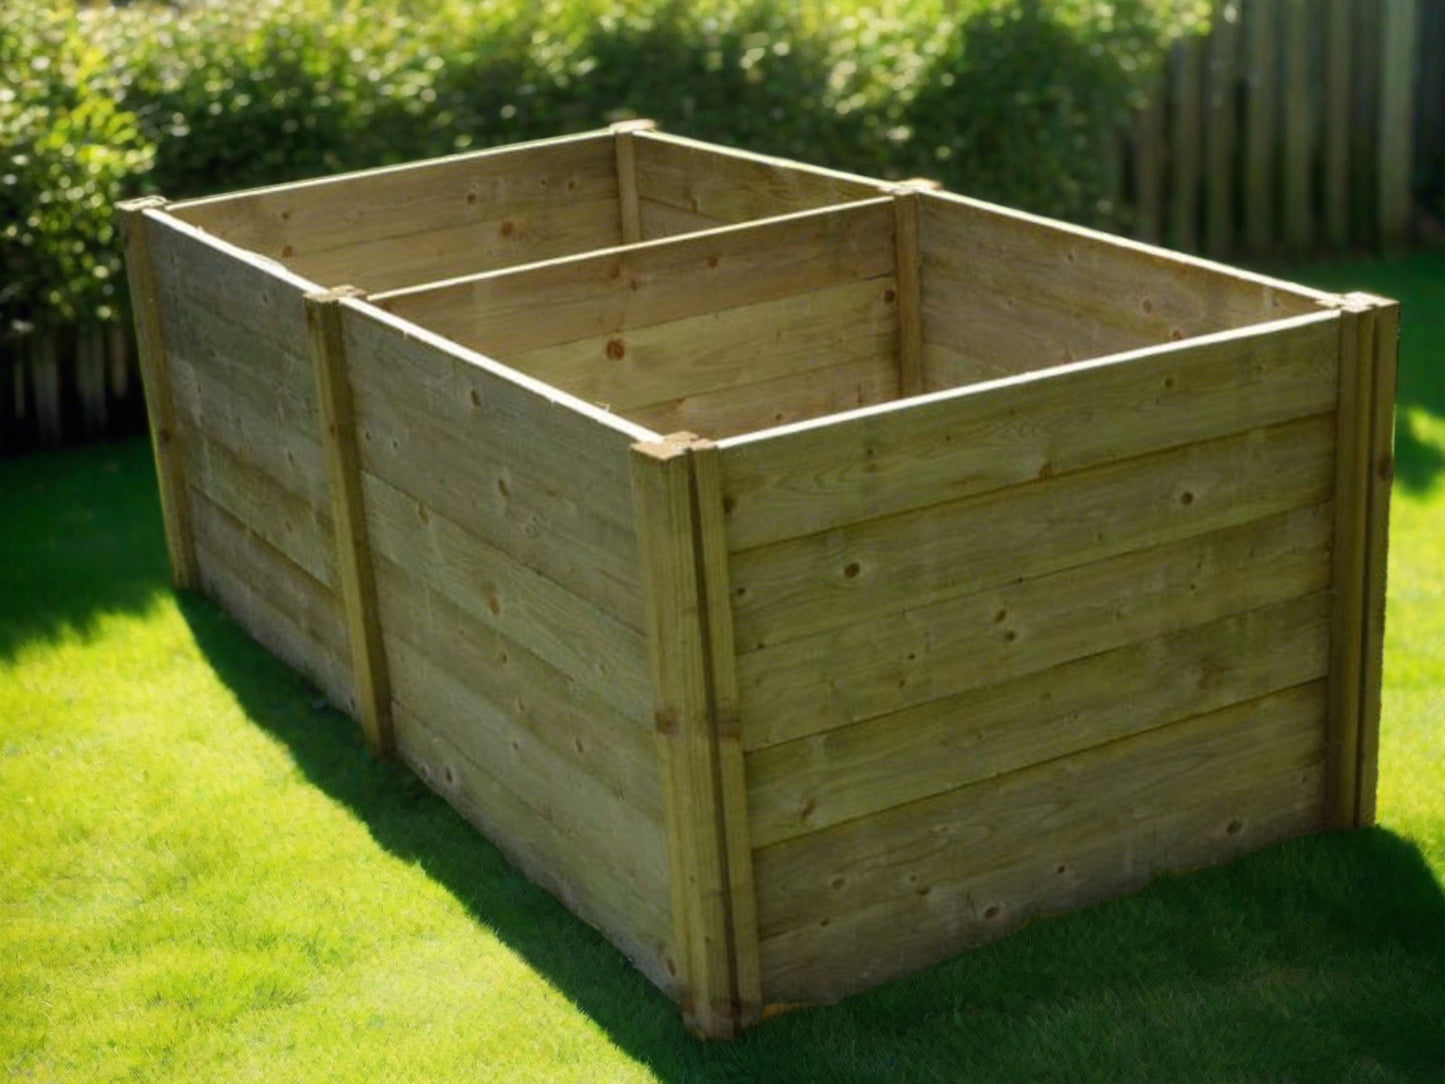 Agamemnon Timber Double Bay Compost Bin side view